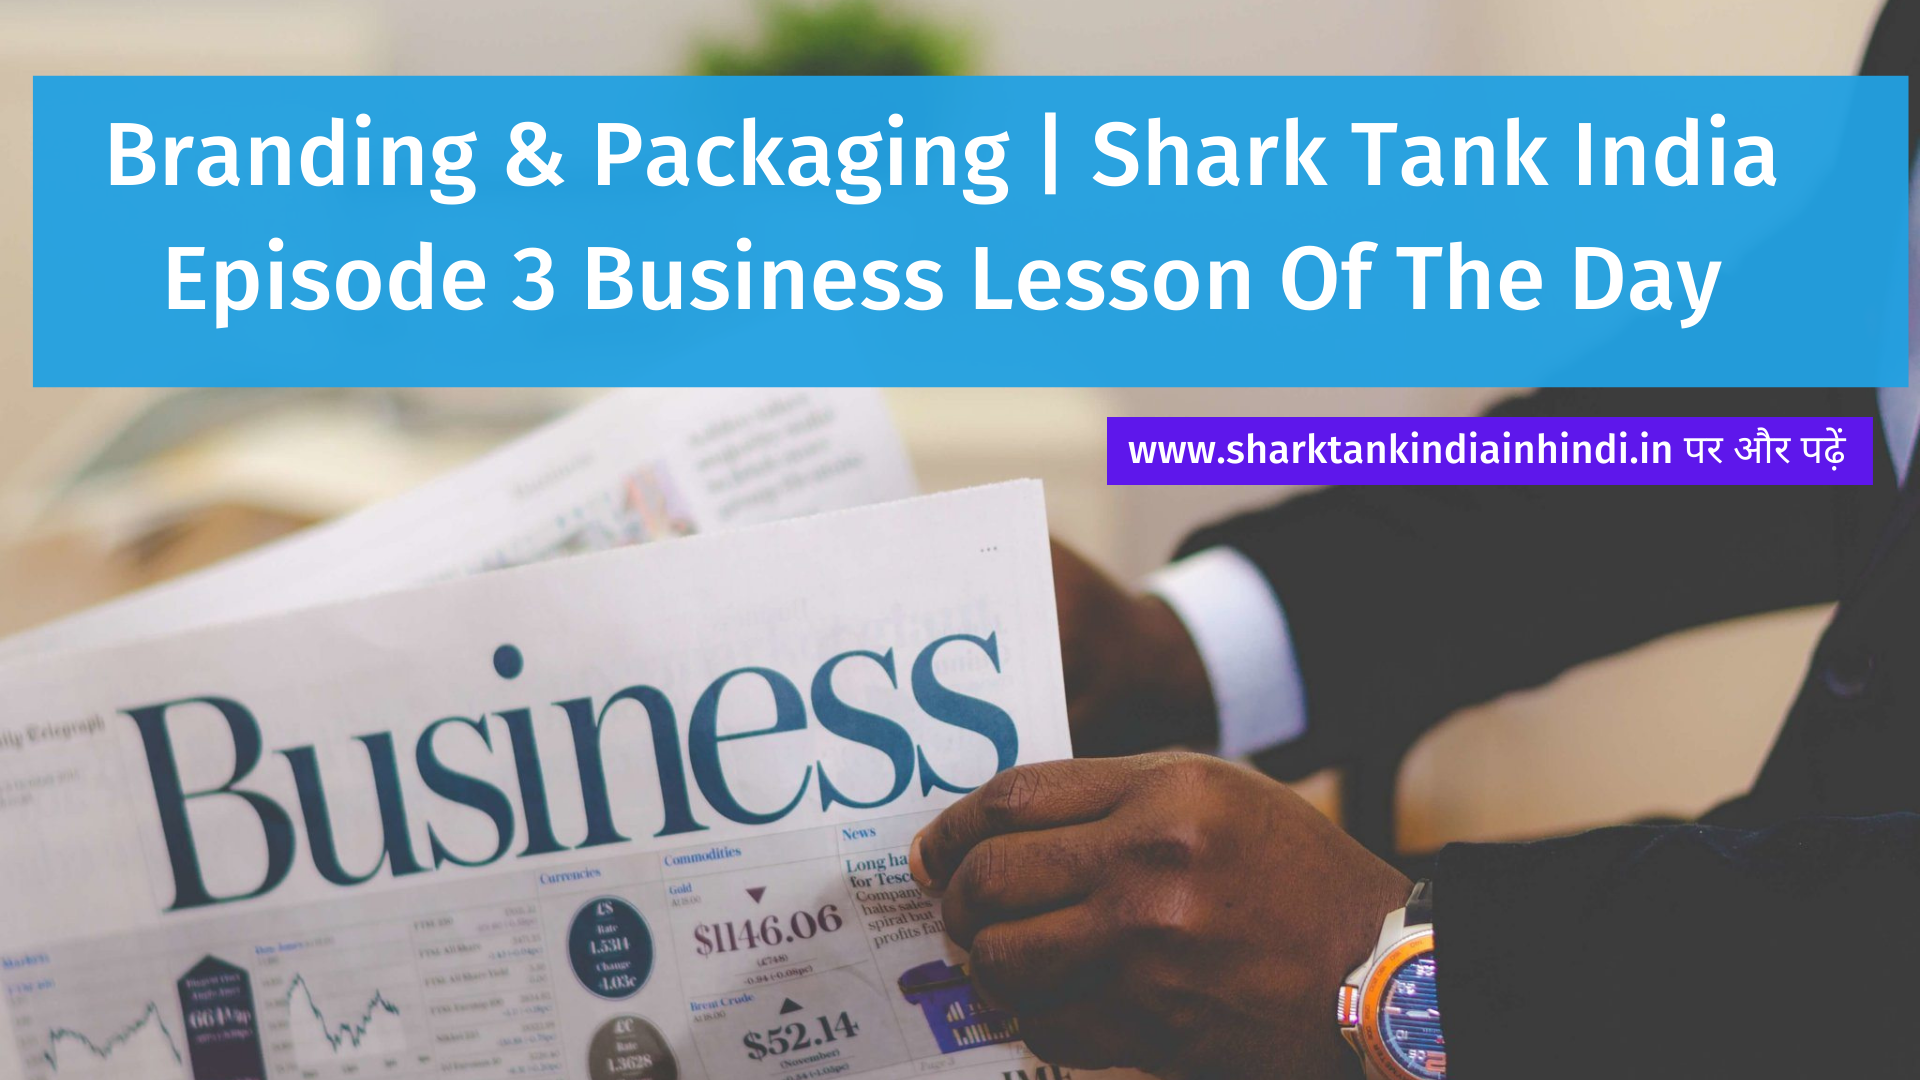 Branding & Packaging Shark Tank India Episode 3 Business Lesson Of The Day